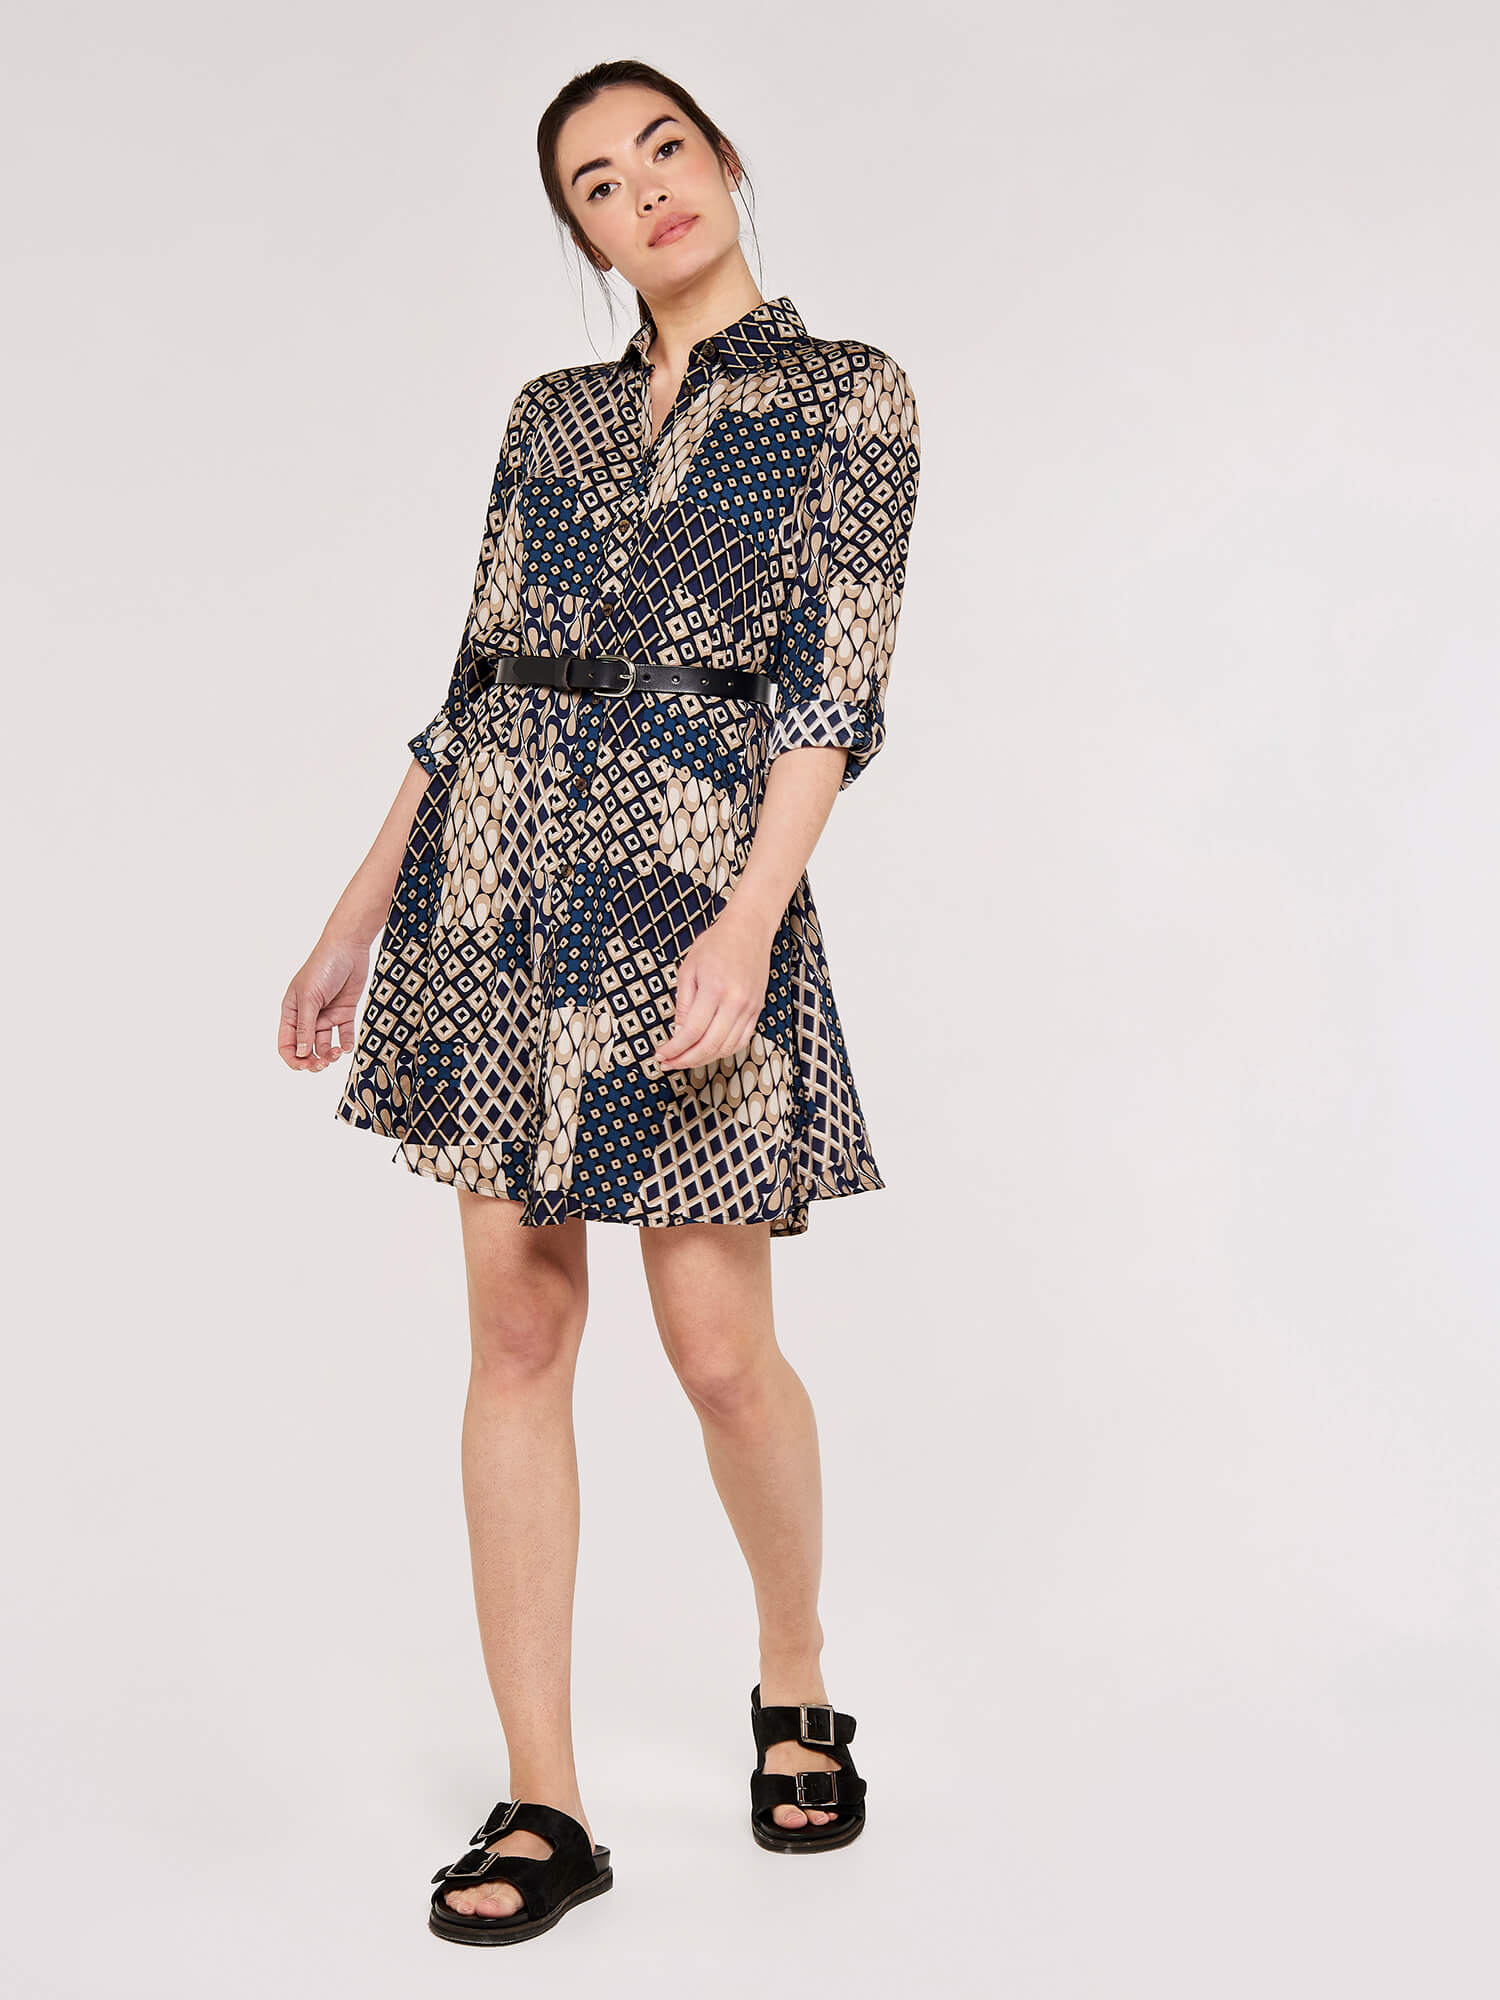 Make a statement with the Apricot Patchwork Swing Shirt Dress. This dress features an eye-catching patchwork pattern and a swing silhoue